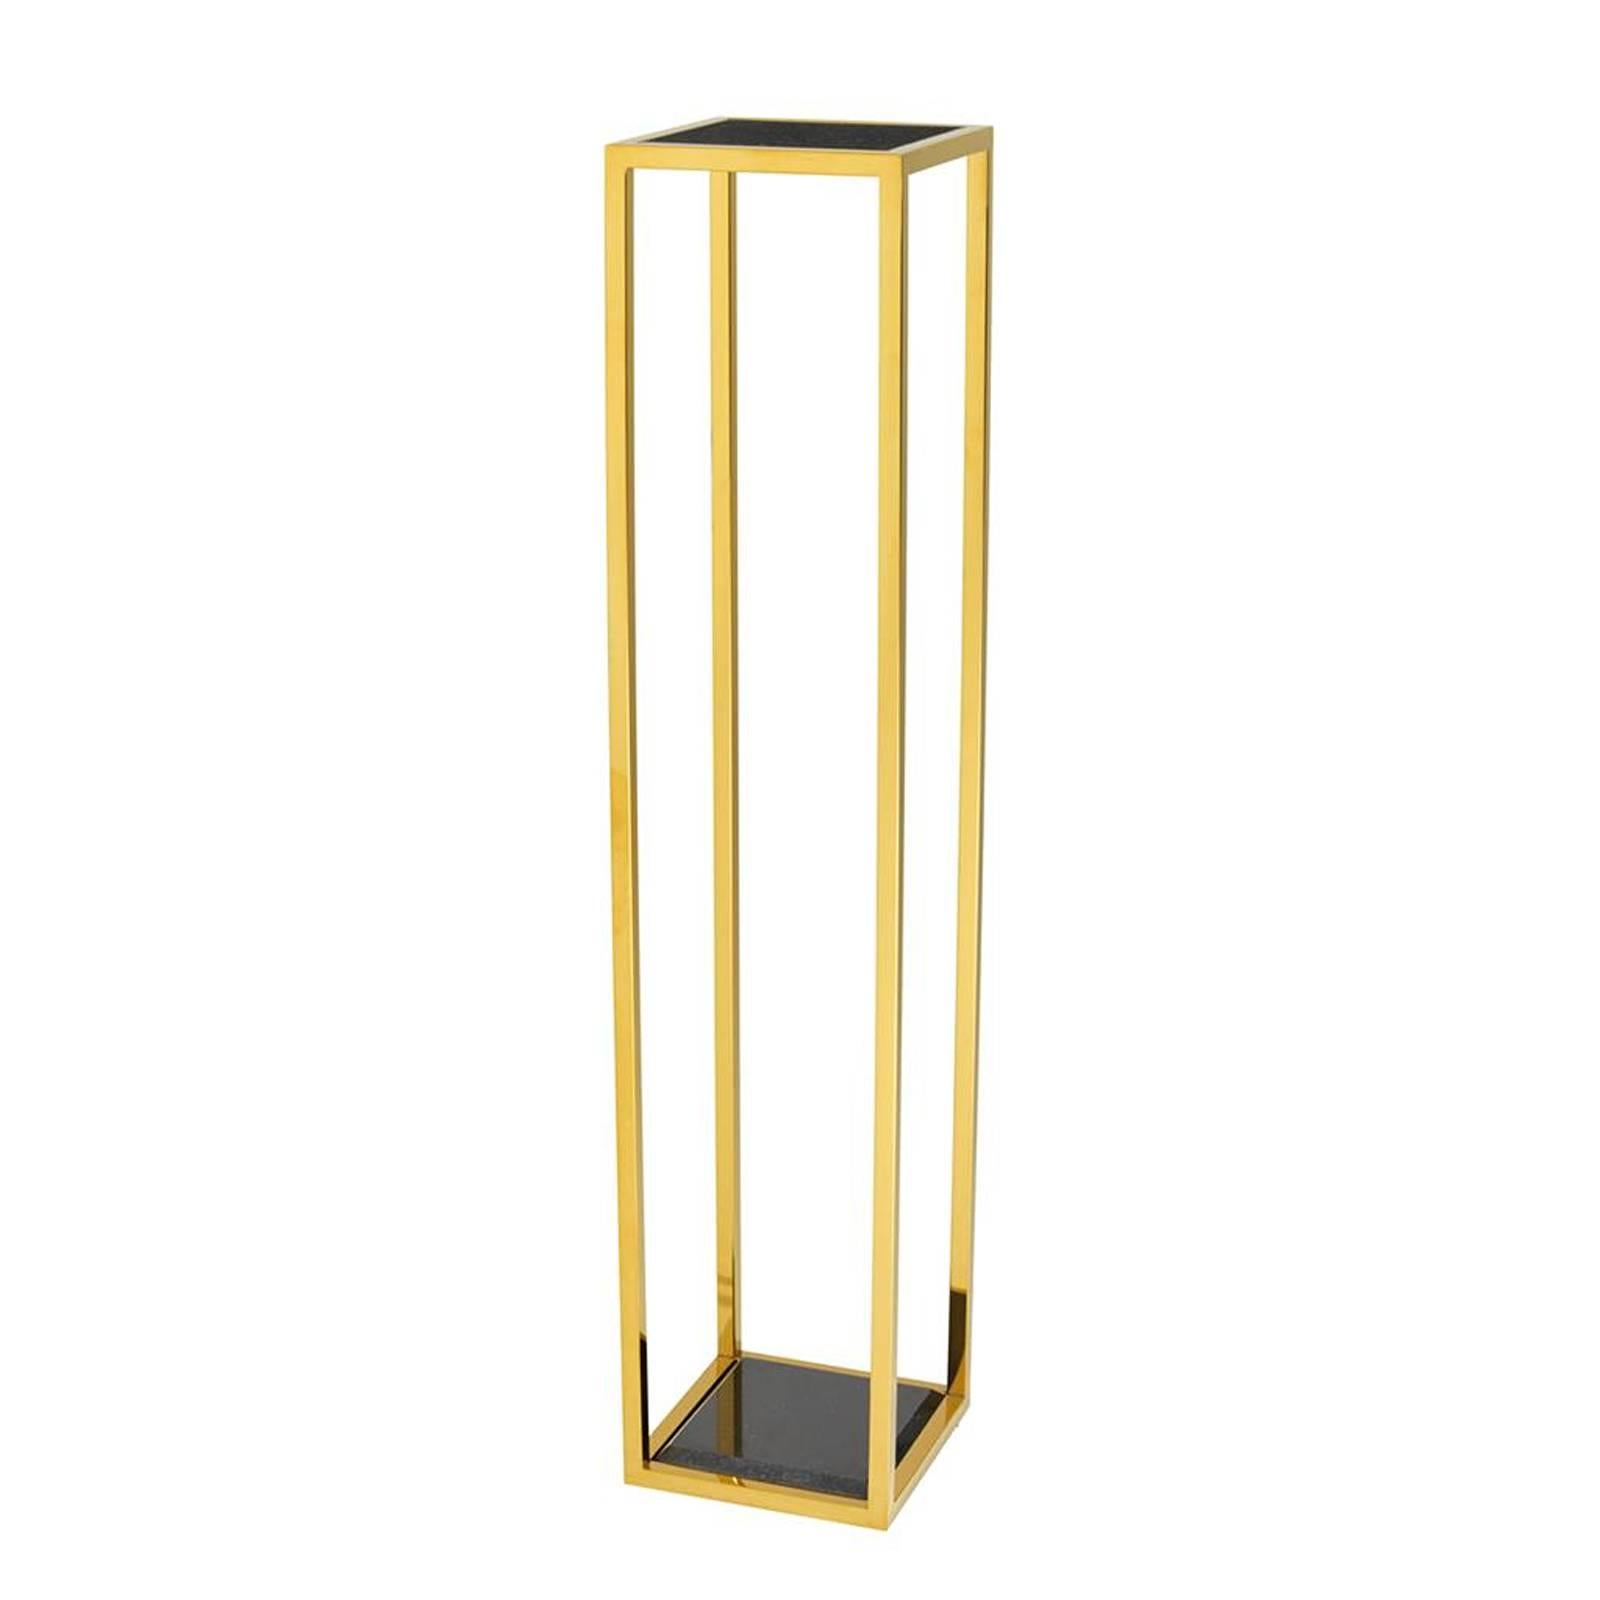 Dutch Orphy Colomn in Gold Finish or Polished Stainless Steel with Black Marble